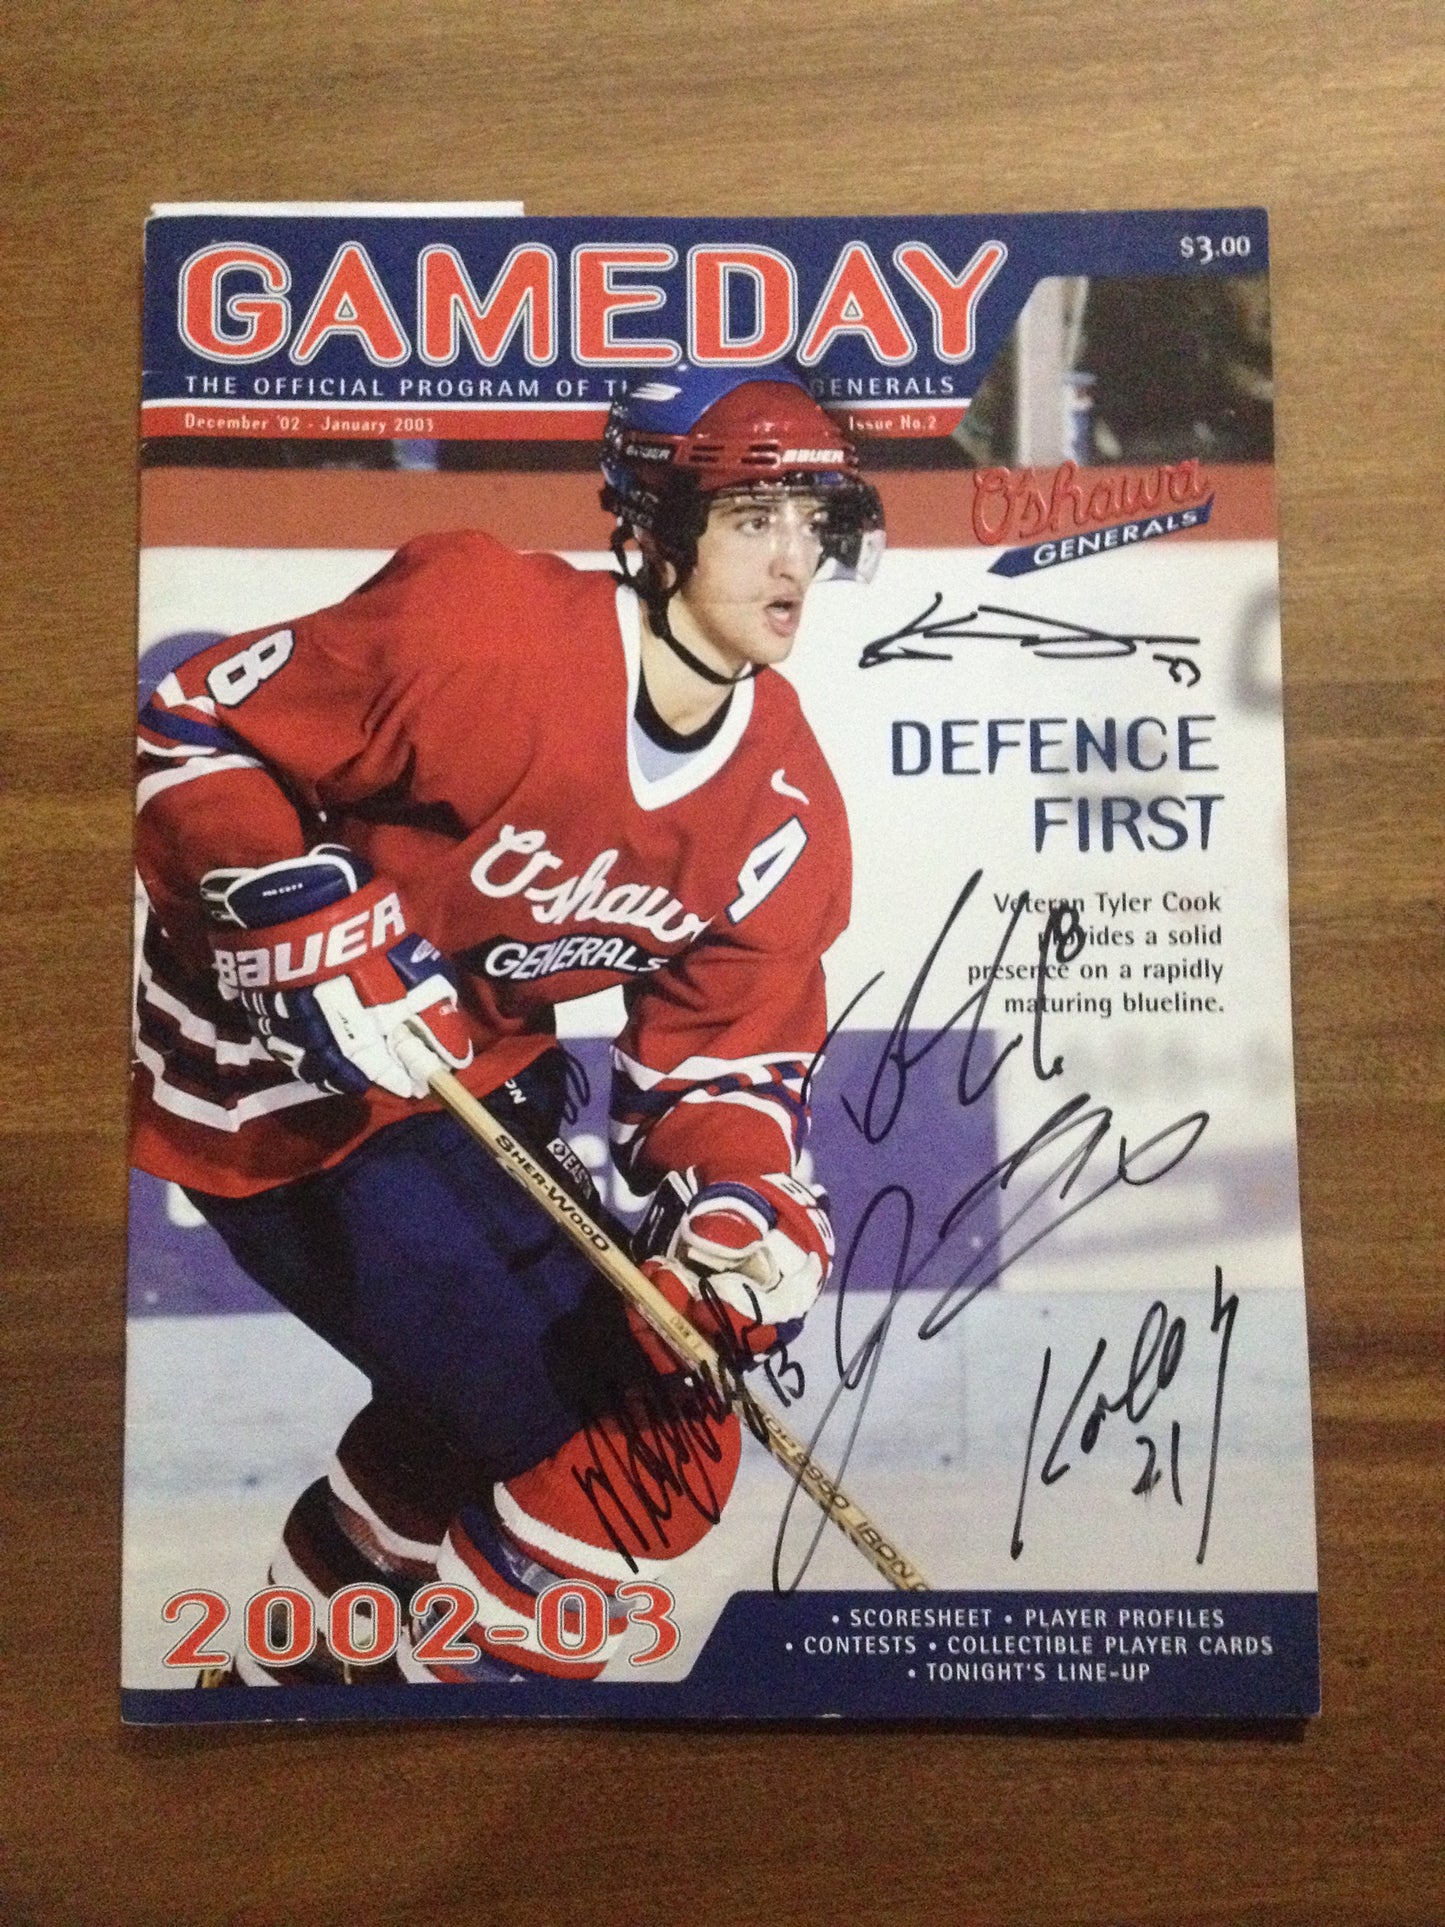 Gameday - Official Program of Oshawa Generals [Multiple Signed]